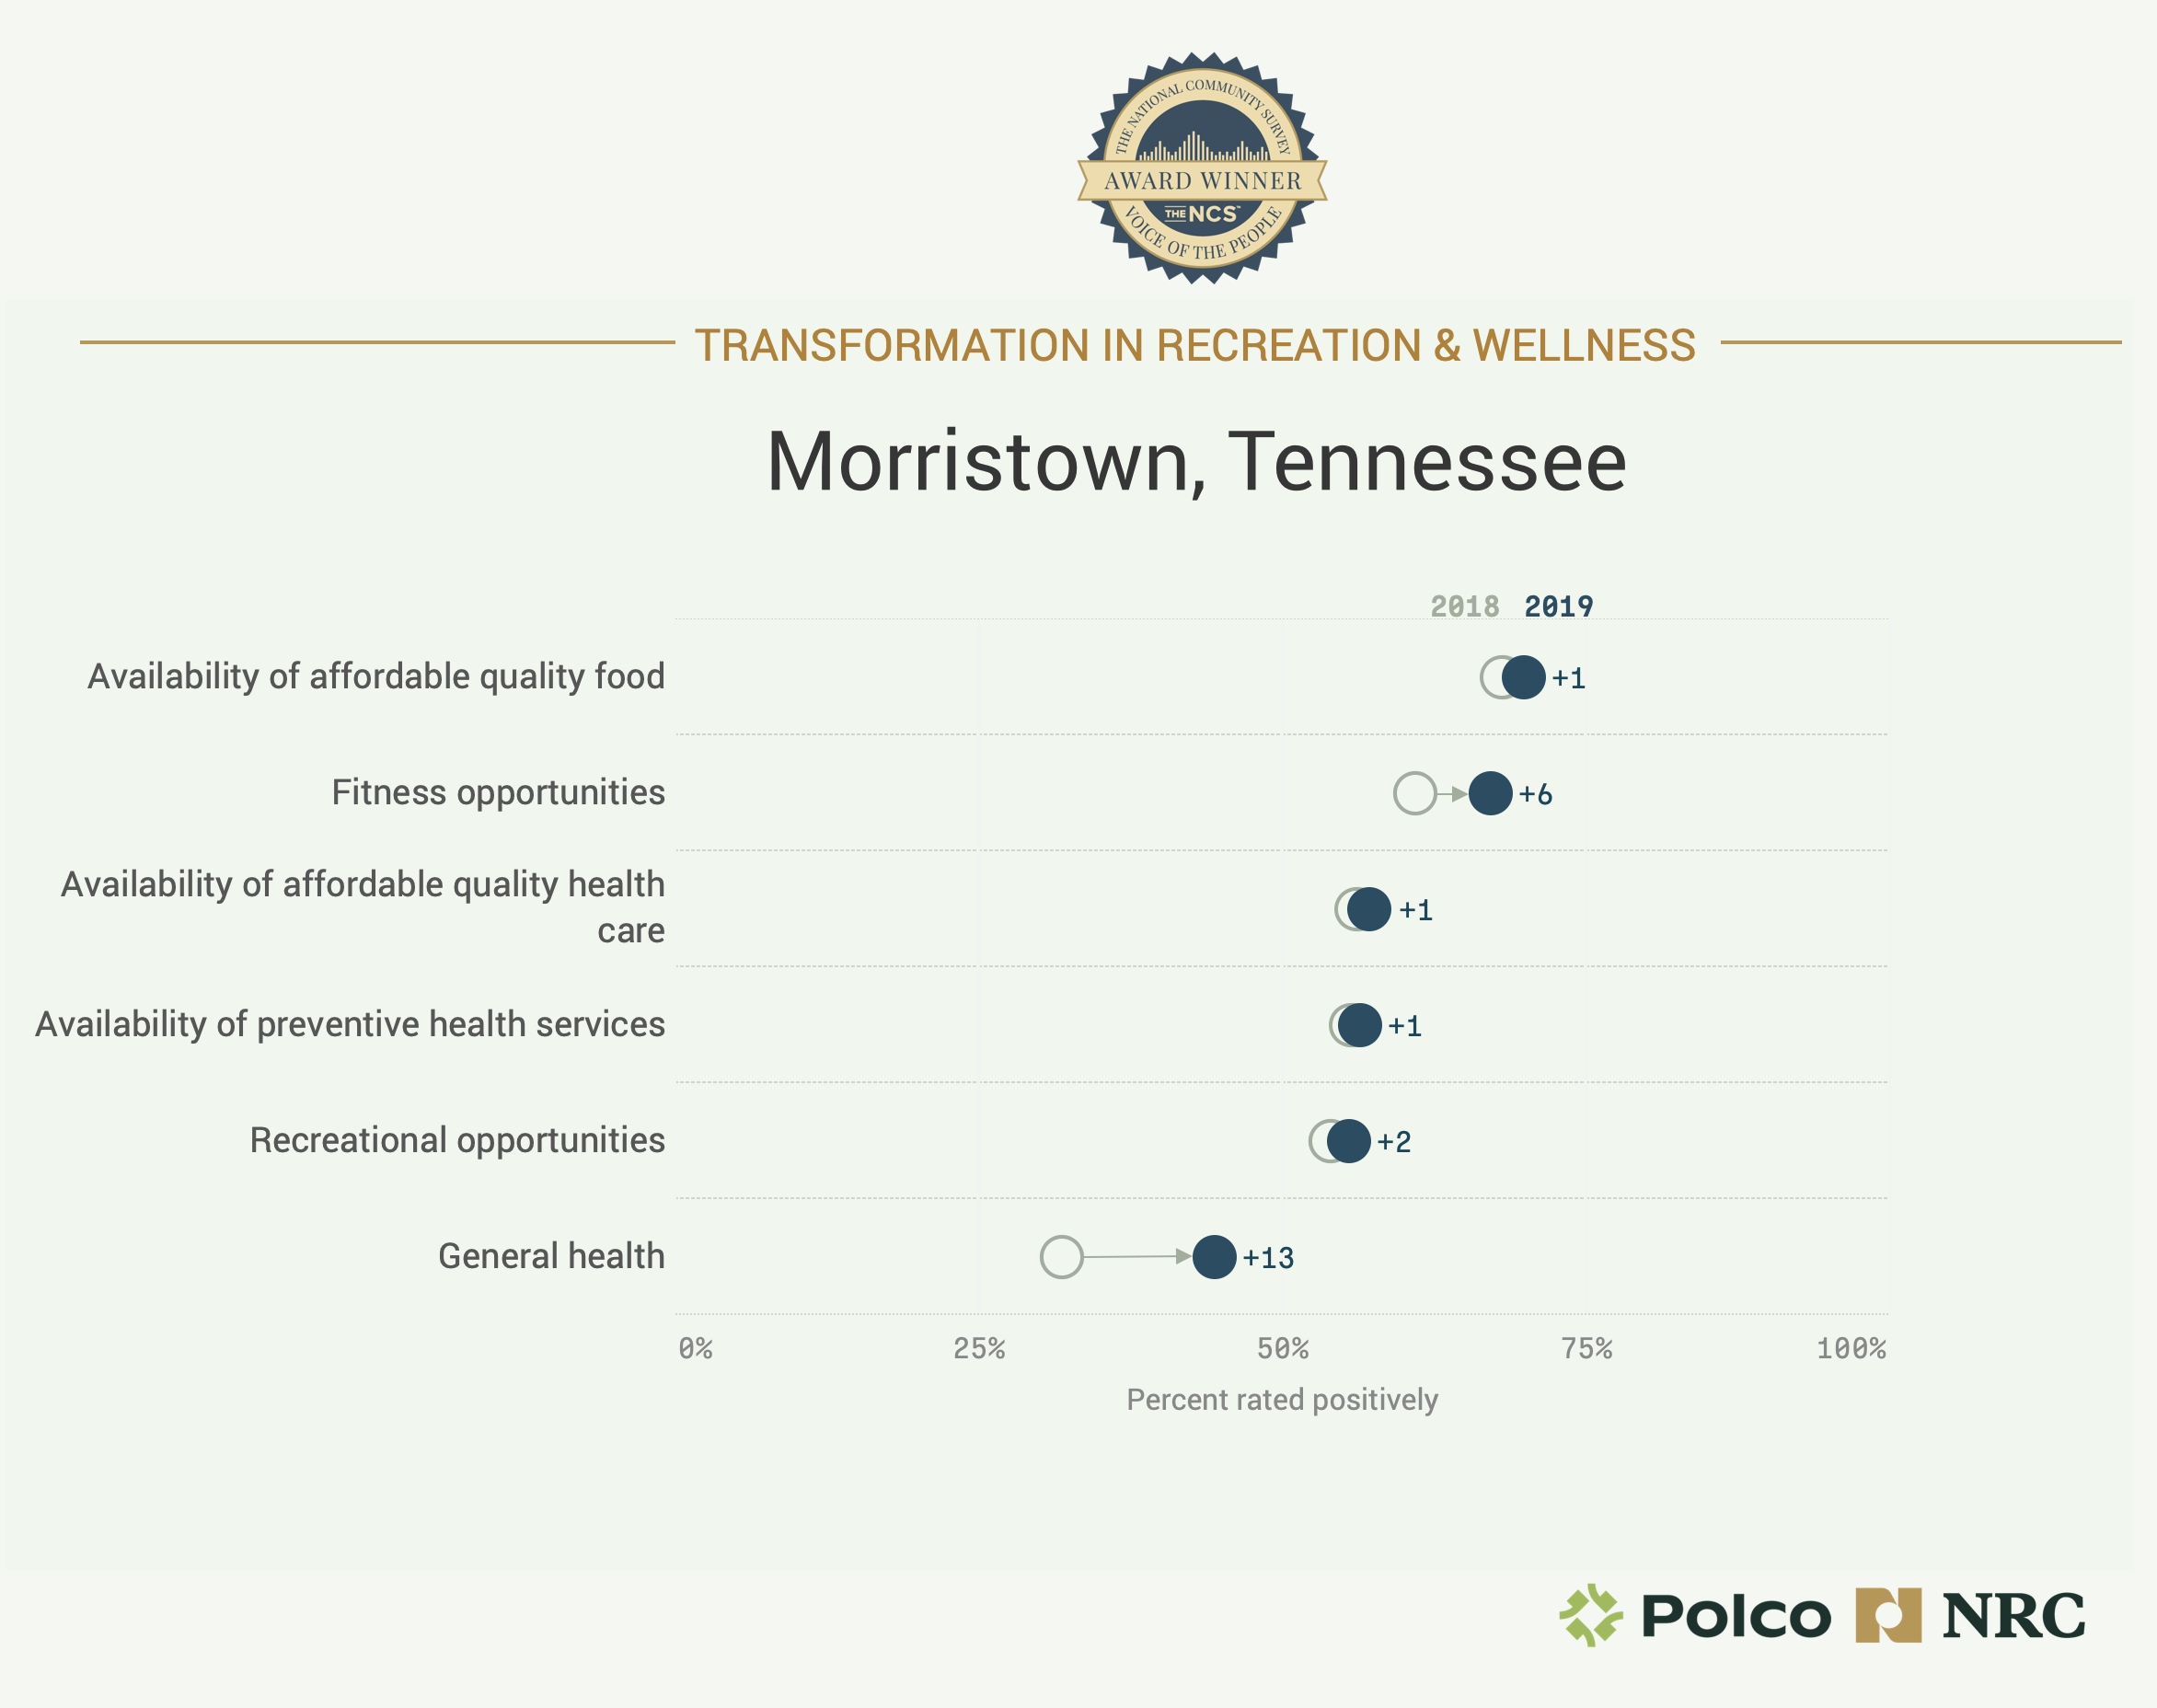 Chart showing Morristown's Transformation in Recreation and Wellness